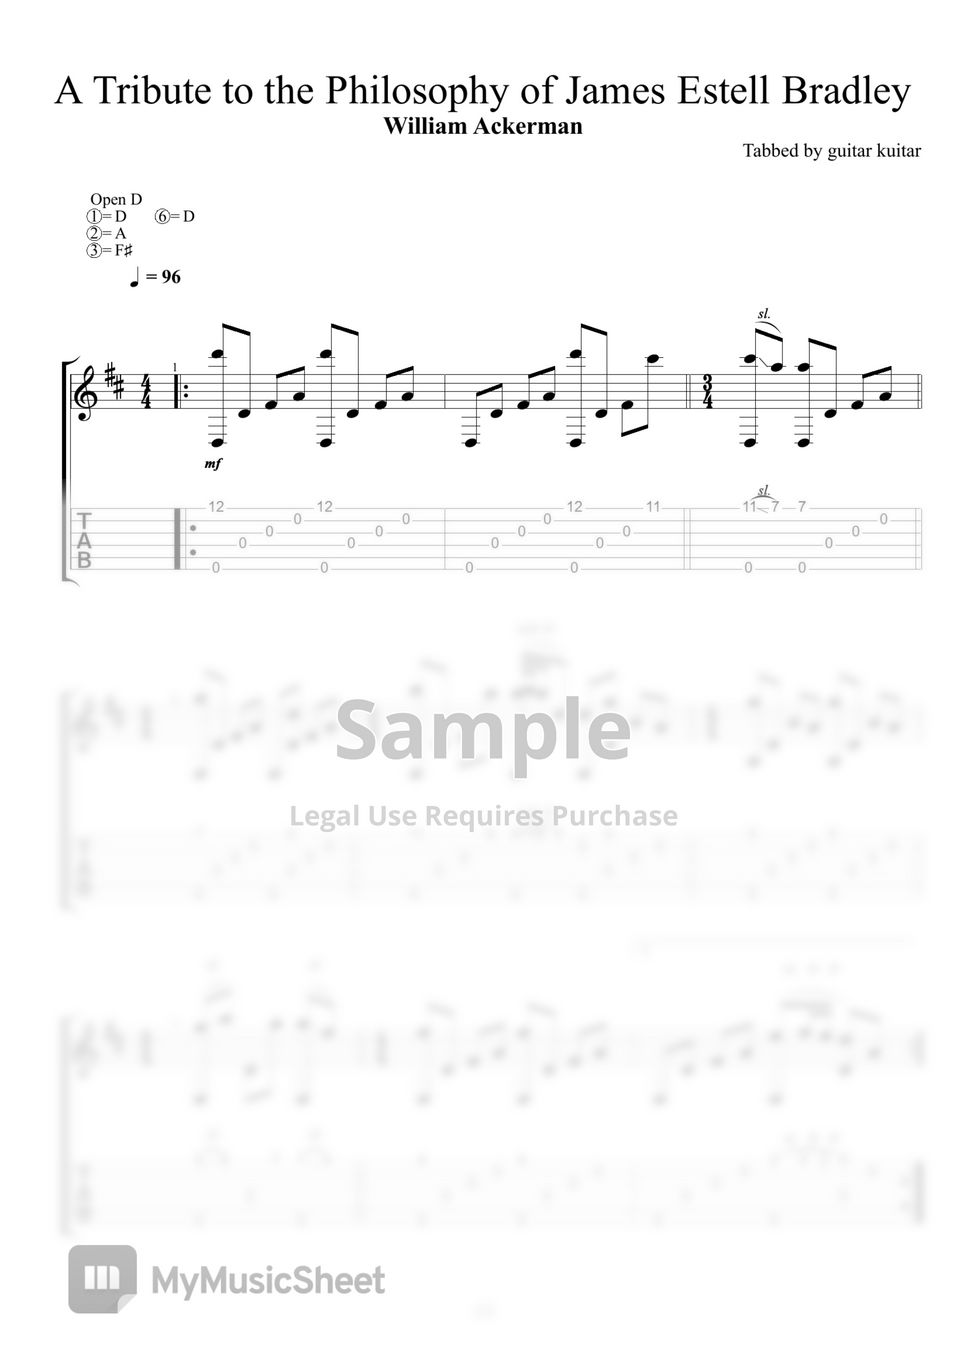 William Ackerman - A Tribute to the Philosophy of James Estell Bradley (TAB Sheet Music) by guitar kuitar